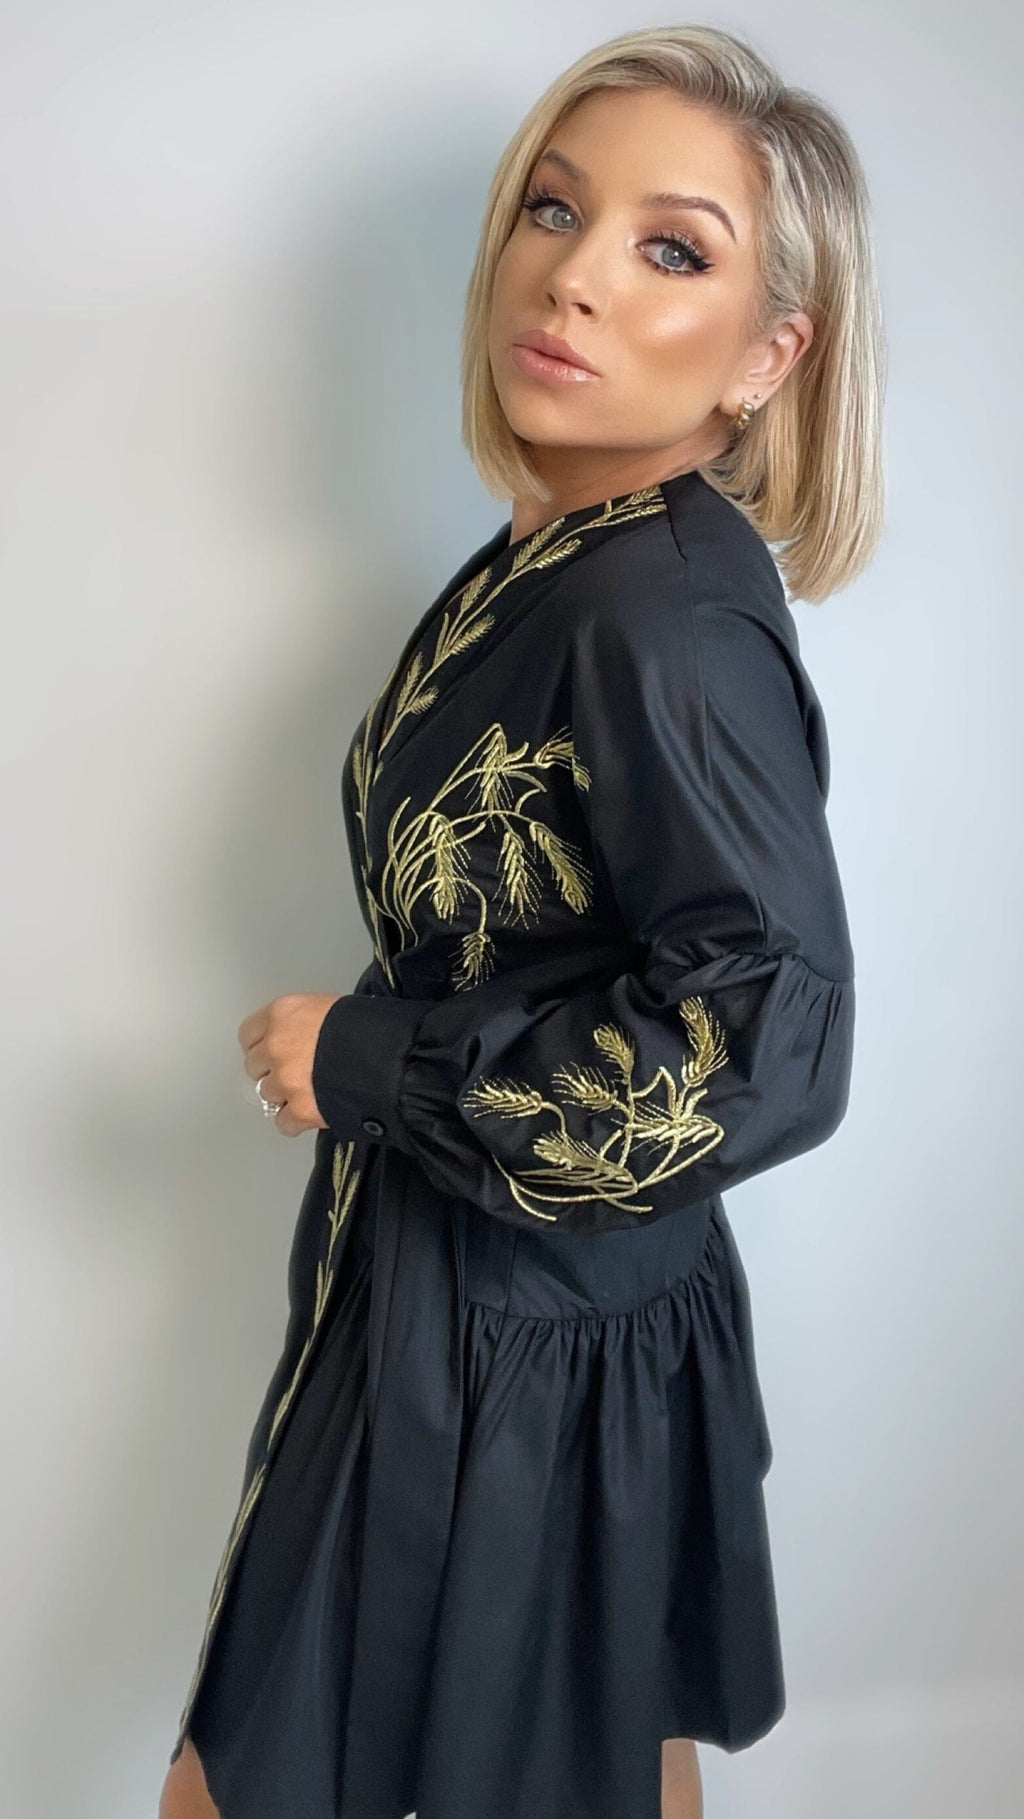 LYNNE EMBROIDERED WRAP DRESS - BLACK Coco Boutique 